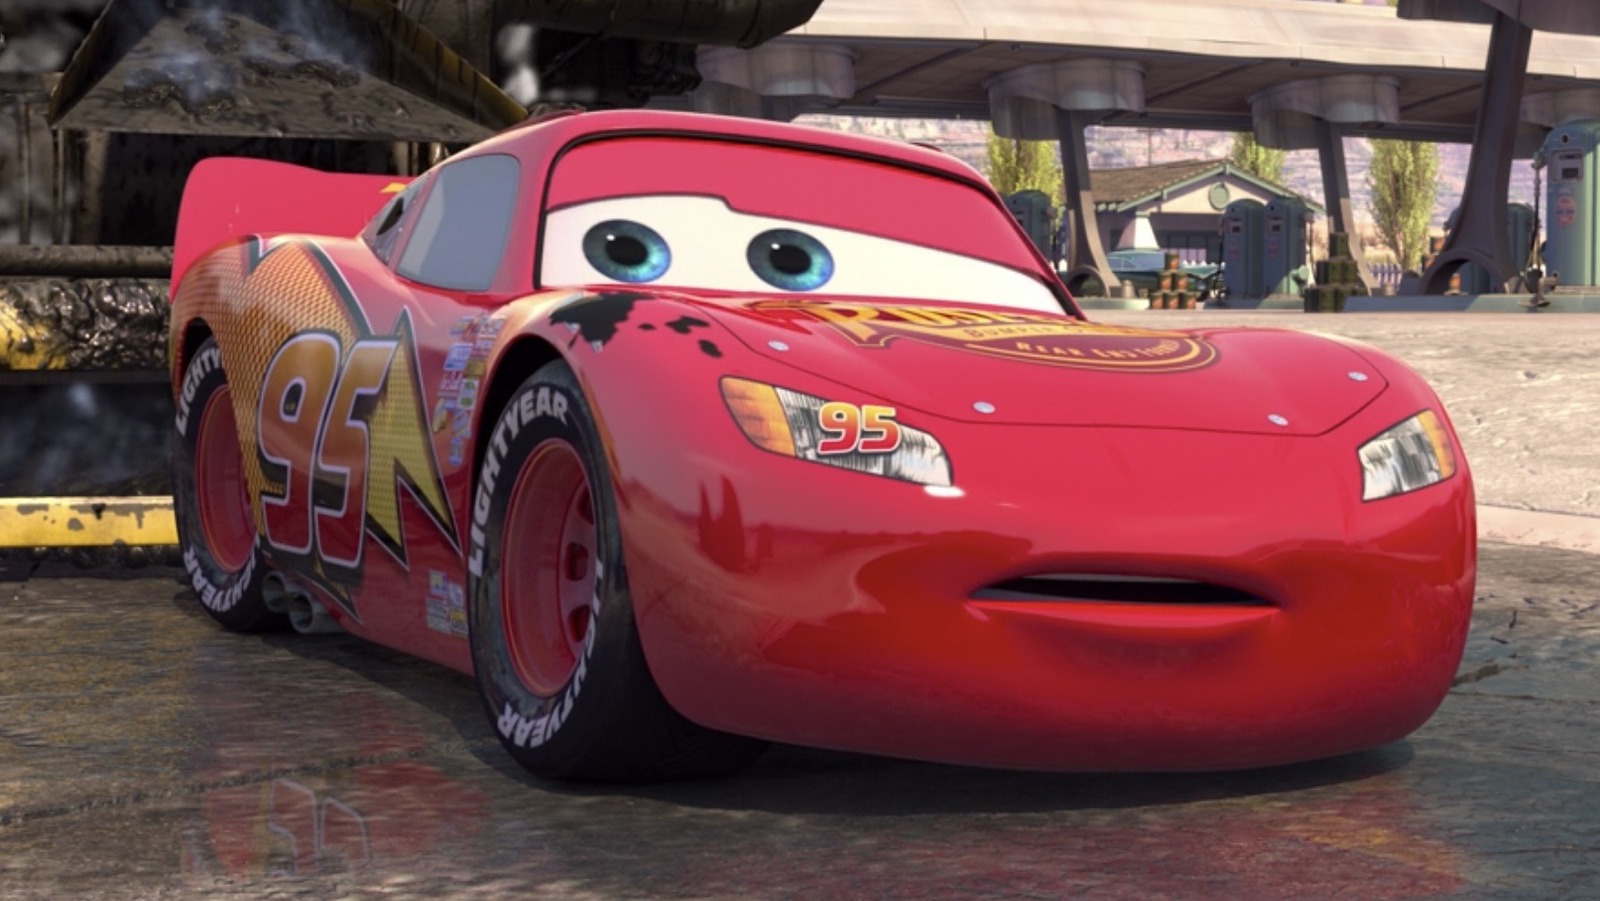 Love 'Cars'? You can now talk to Lightning McQueen for real